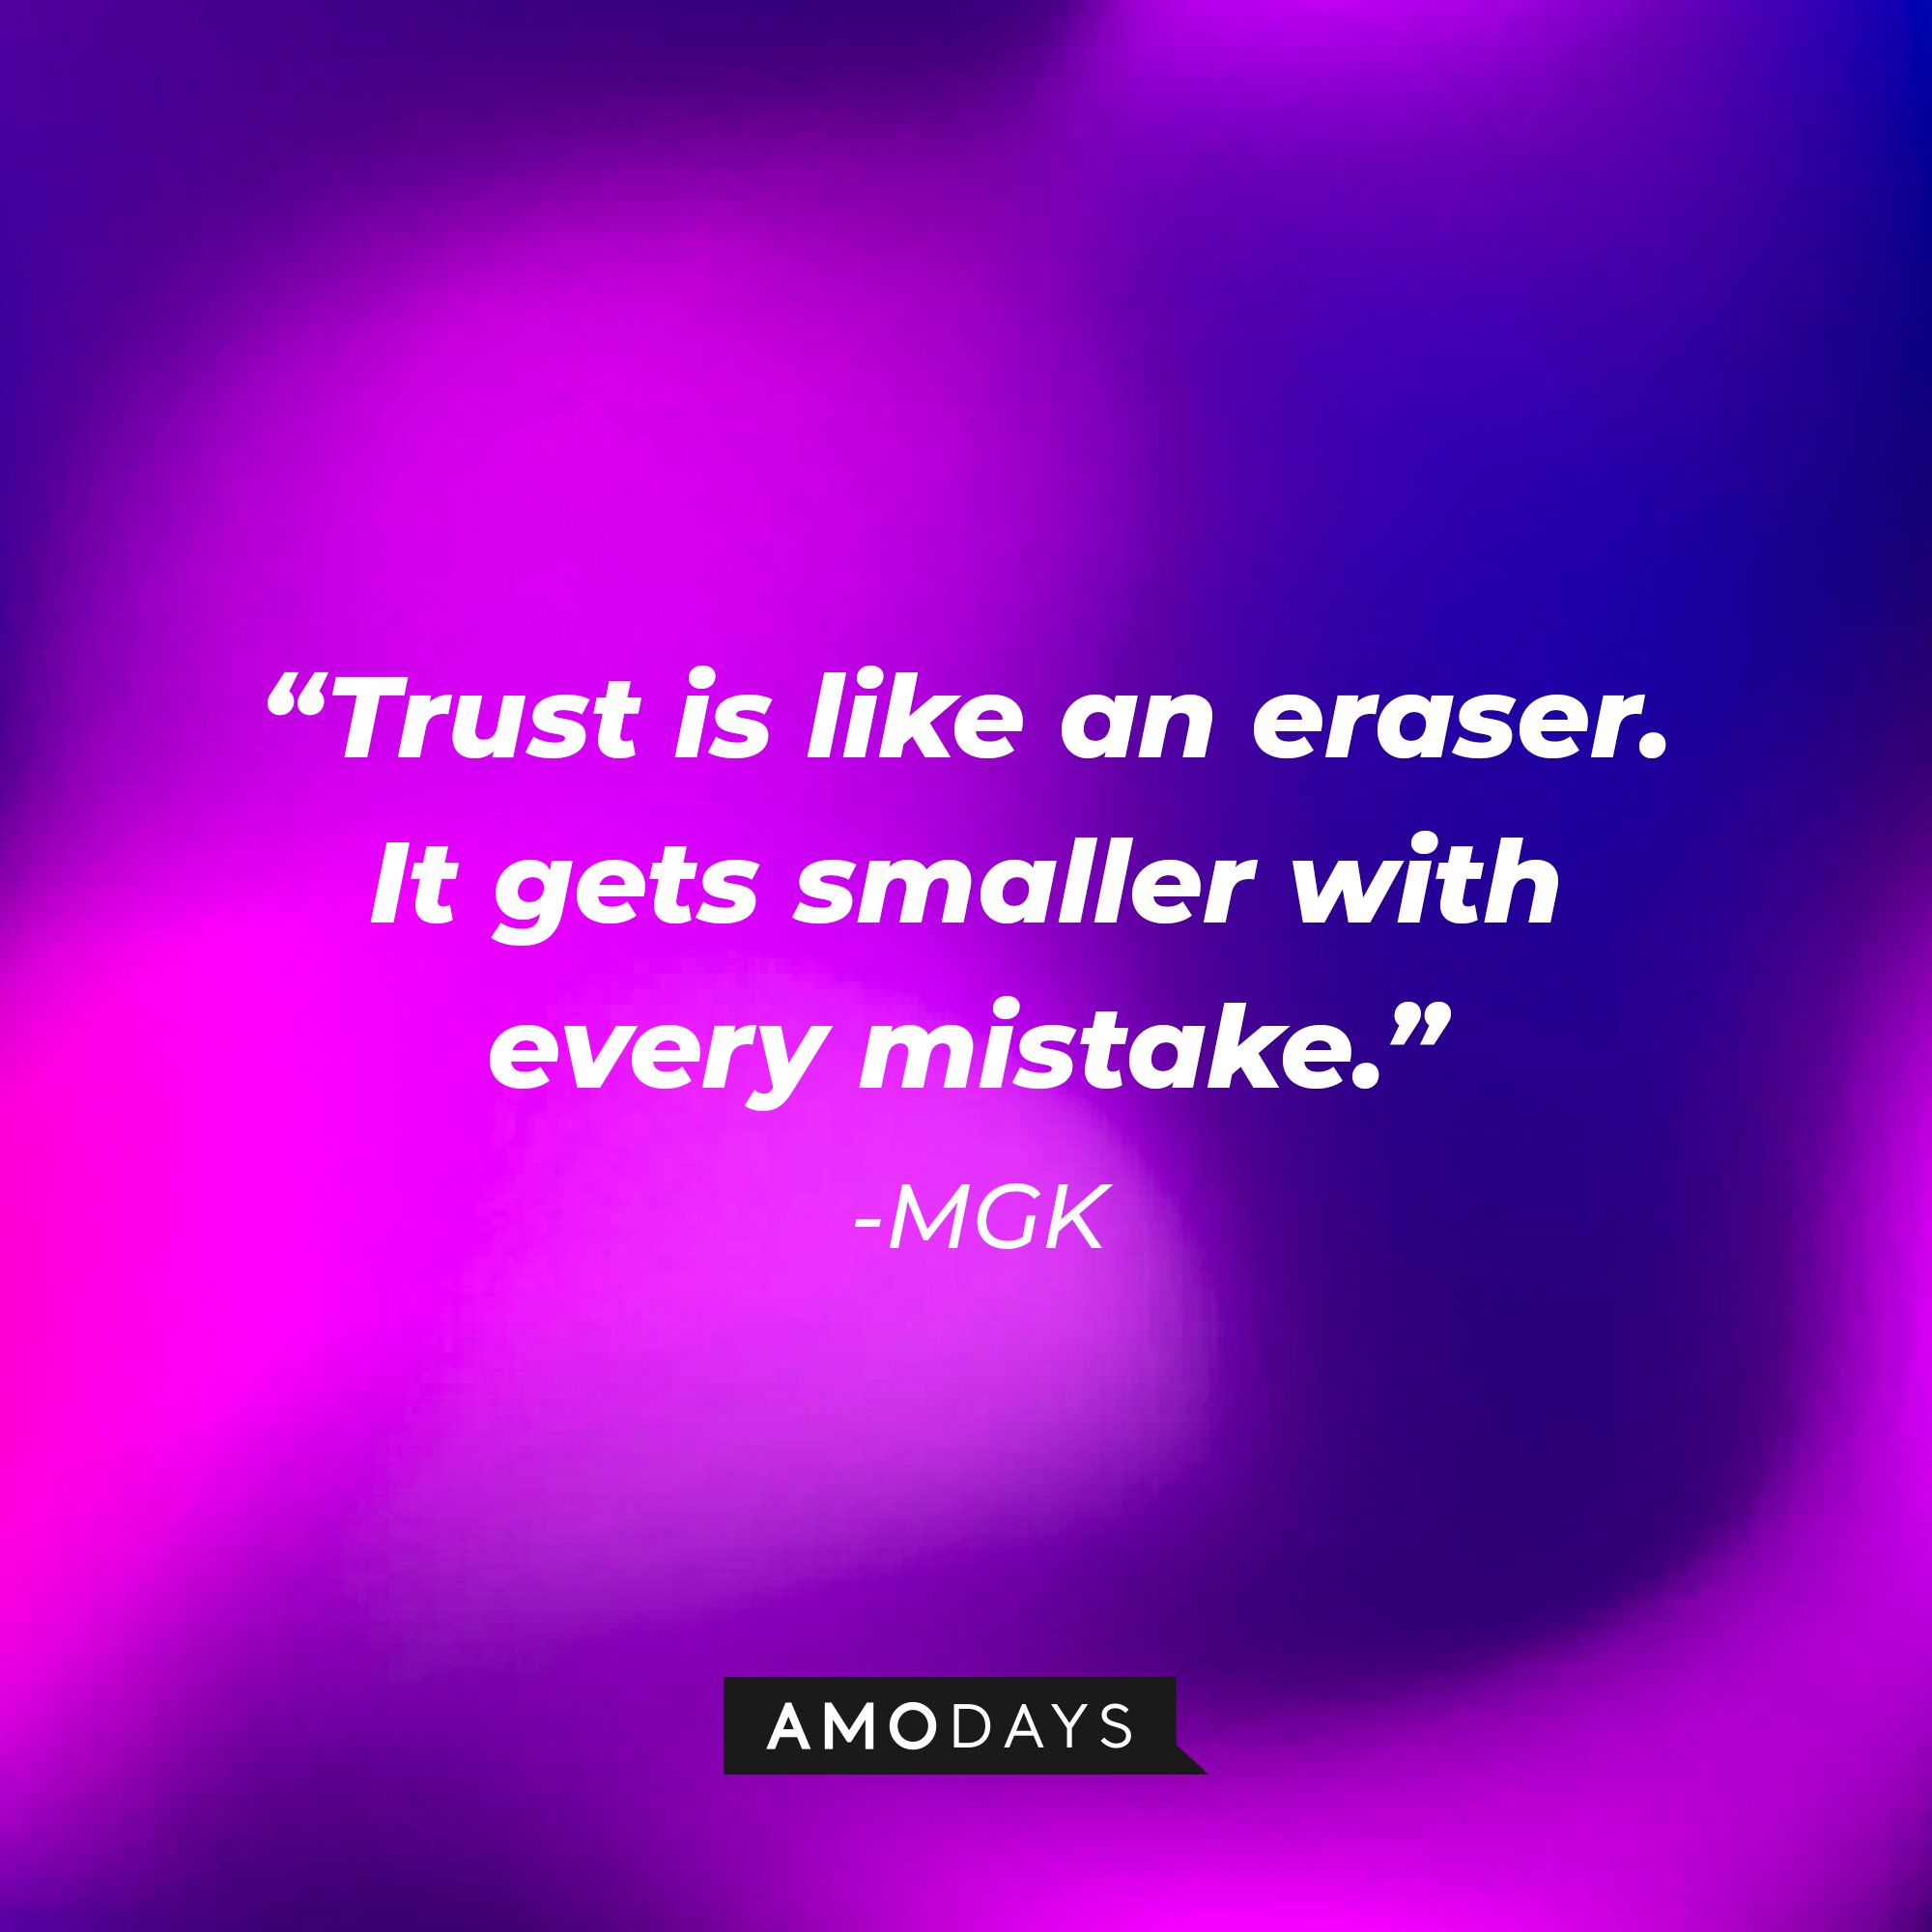 MGK's quote: "Trust is like an eraser. It gets smaller with every mistake." | Image: AmoDays